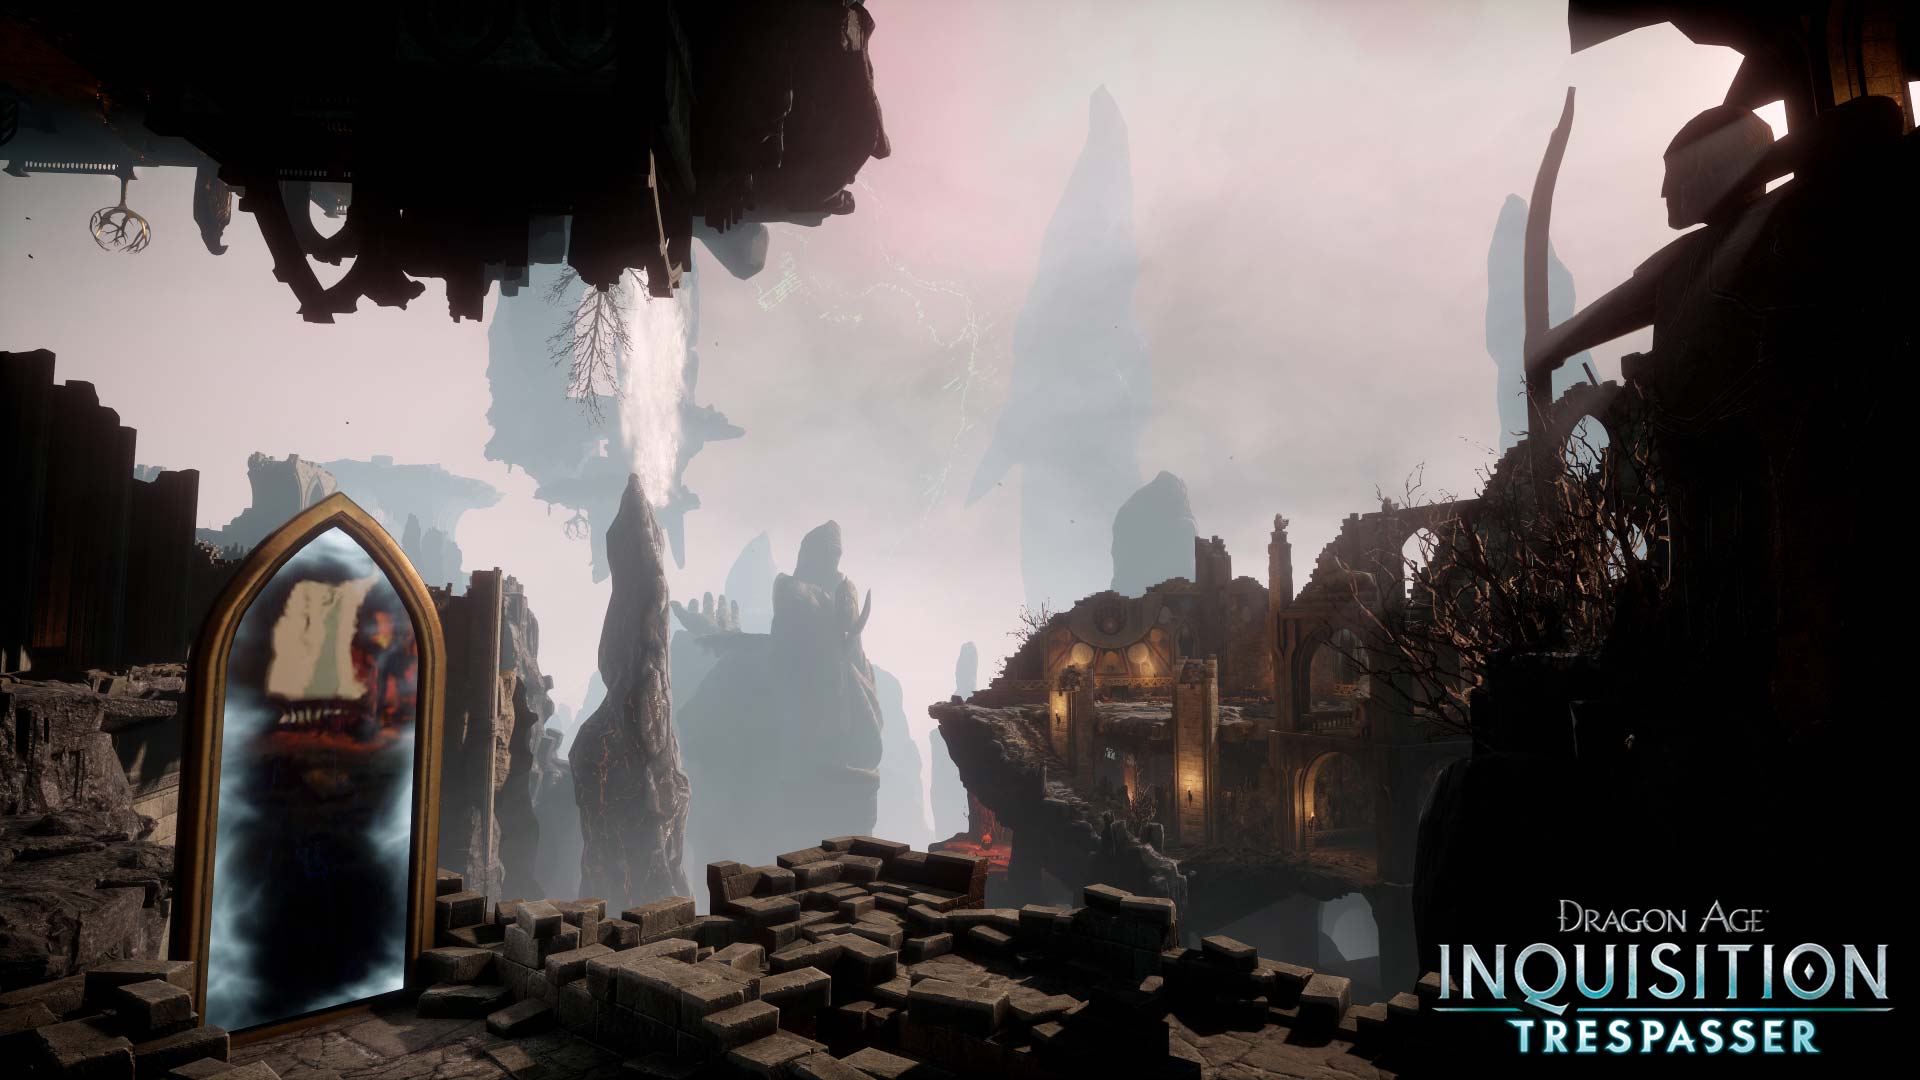 Revisit Dragon Age: Inquisition One Last Time with the Game's Final Story DLC